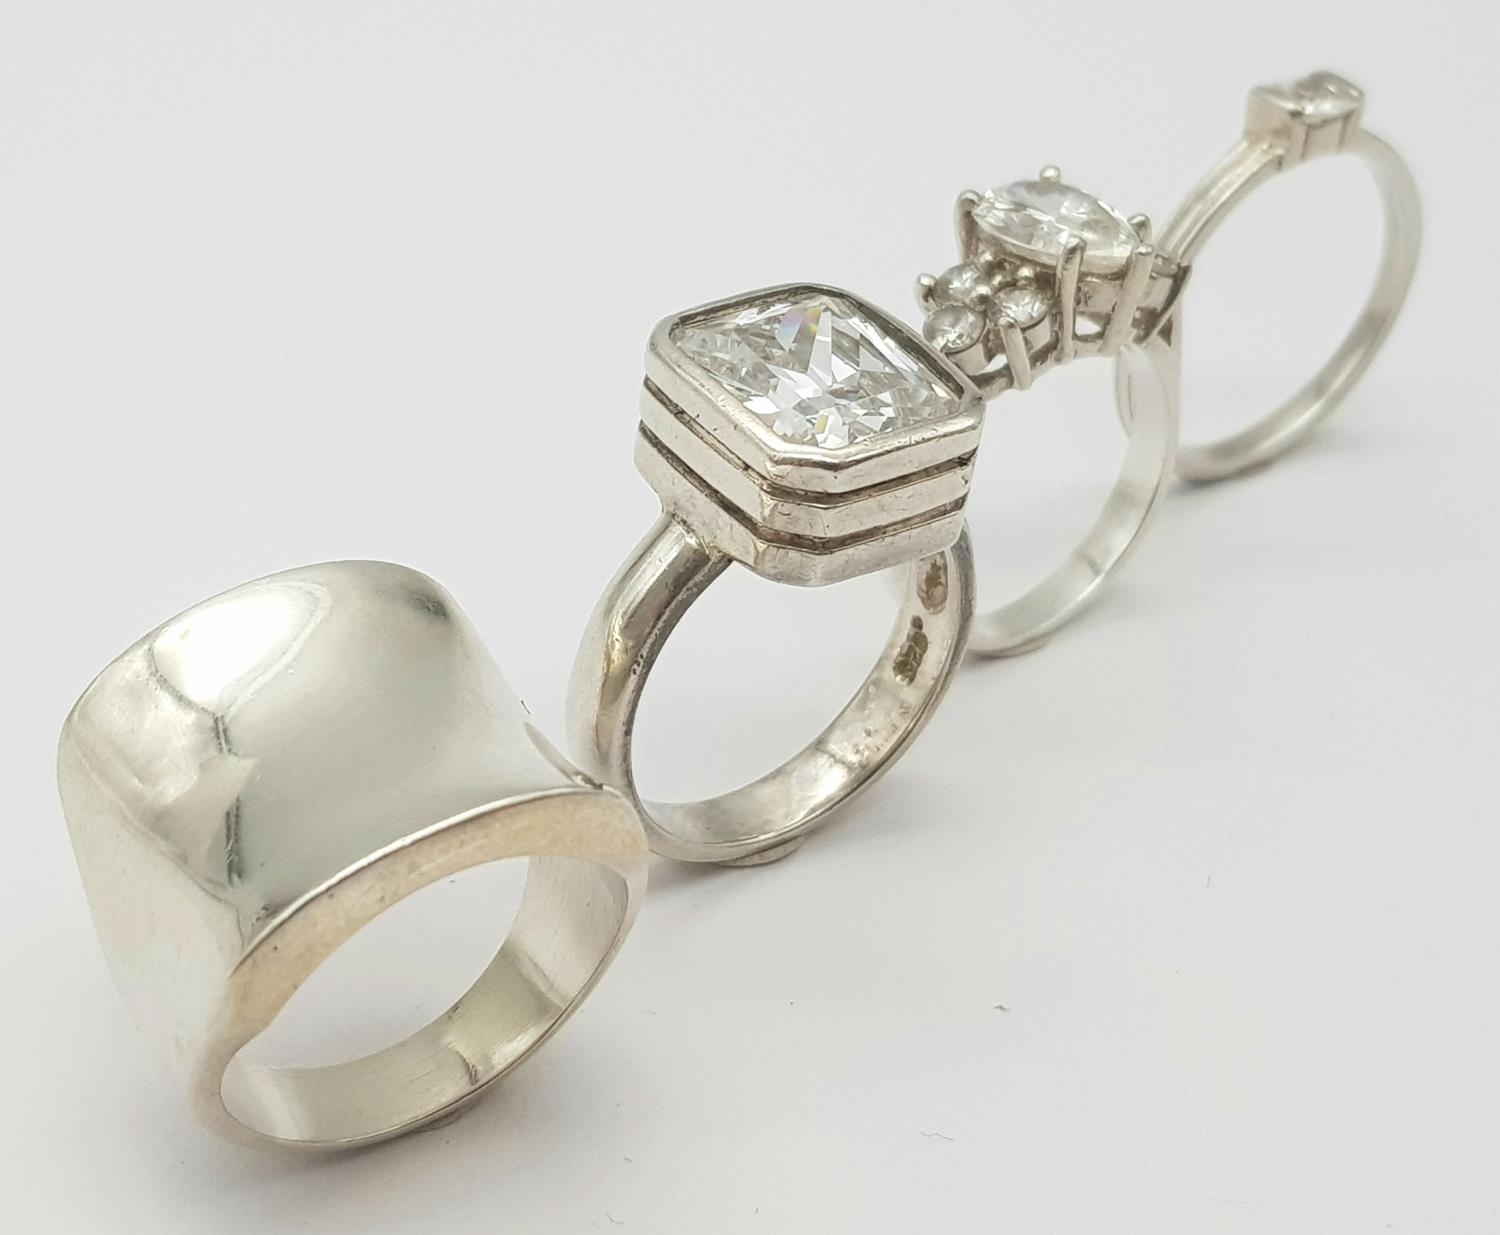 A Selection of 4 sterling silver rings, some set with cubic zirconia, sizes N-R, total weight 28.3g. - Image 2 of 6